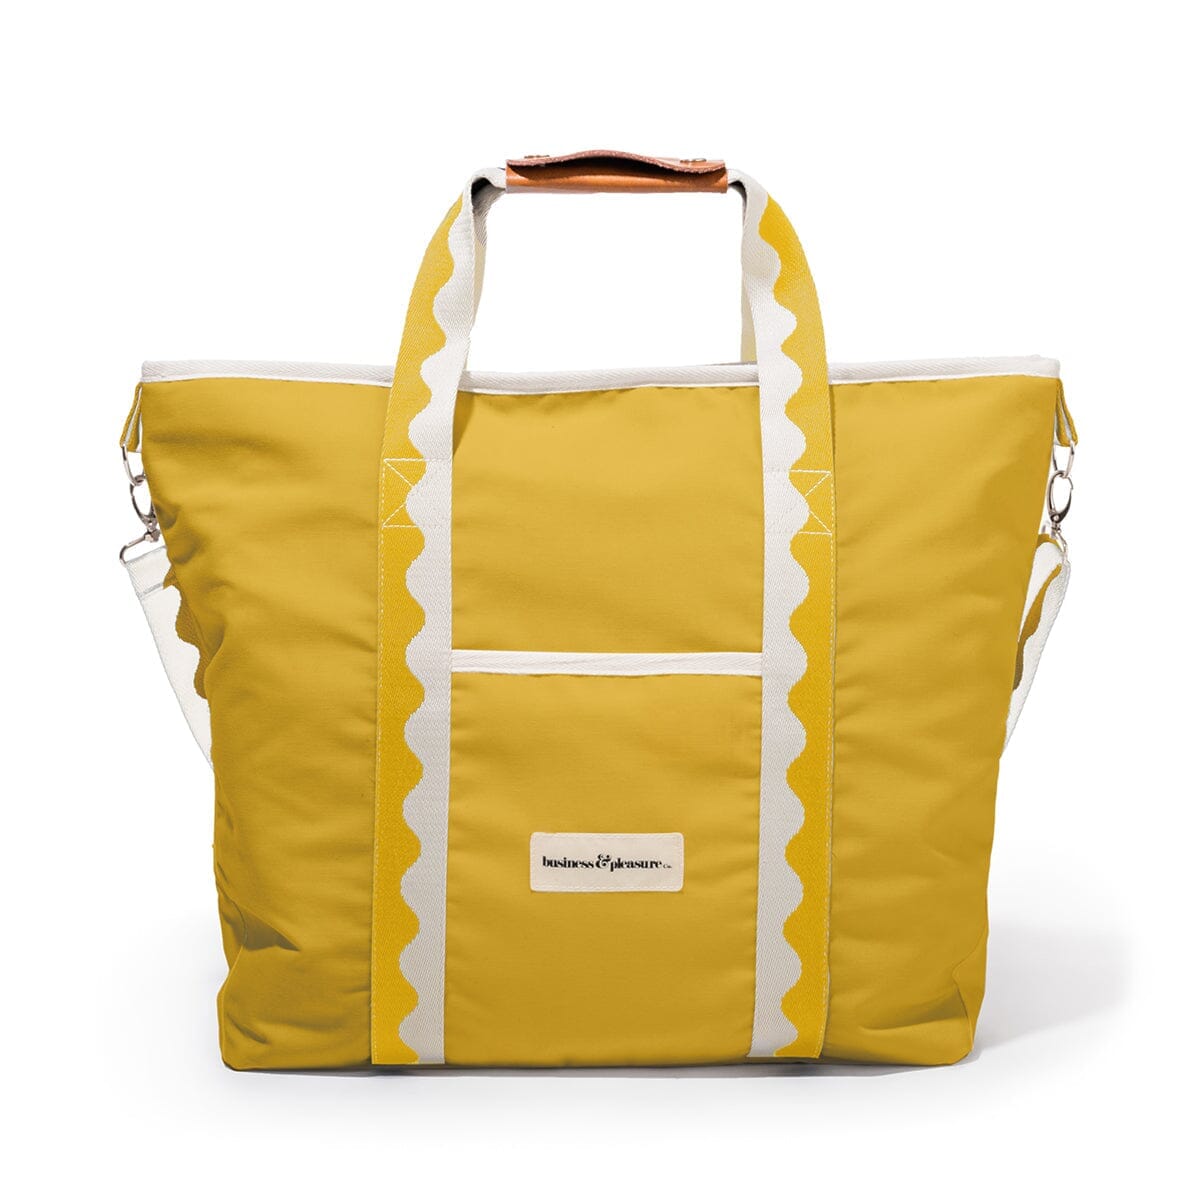 The Cooler Tote Bag - Rivie Mimosa Cooler Tote Business & Pleasure Co Aus 